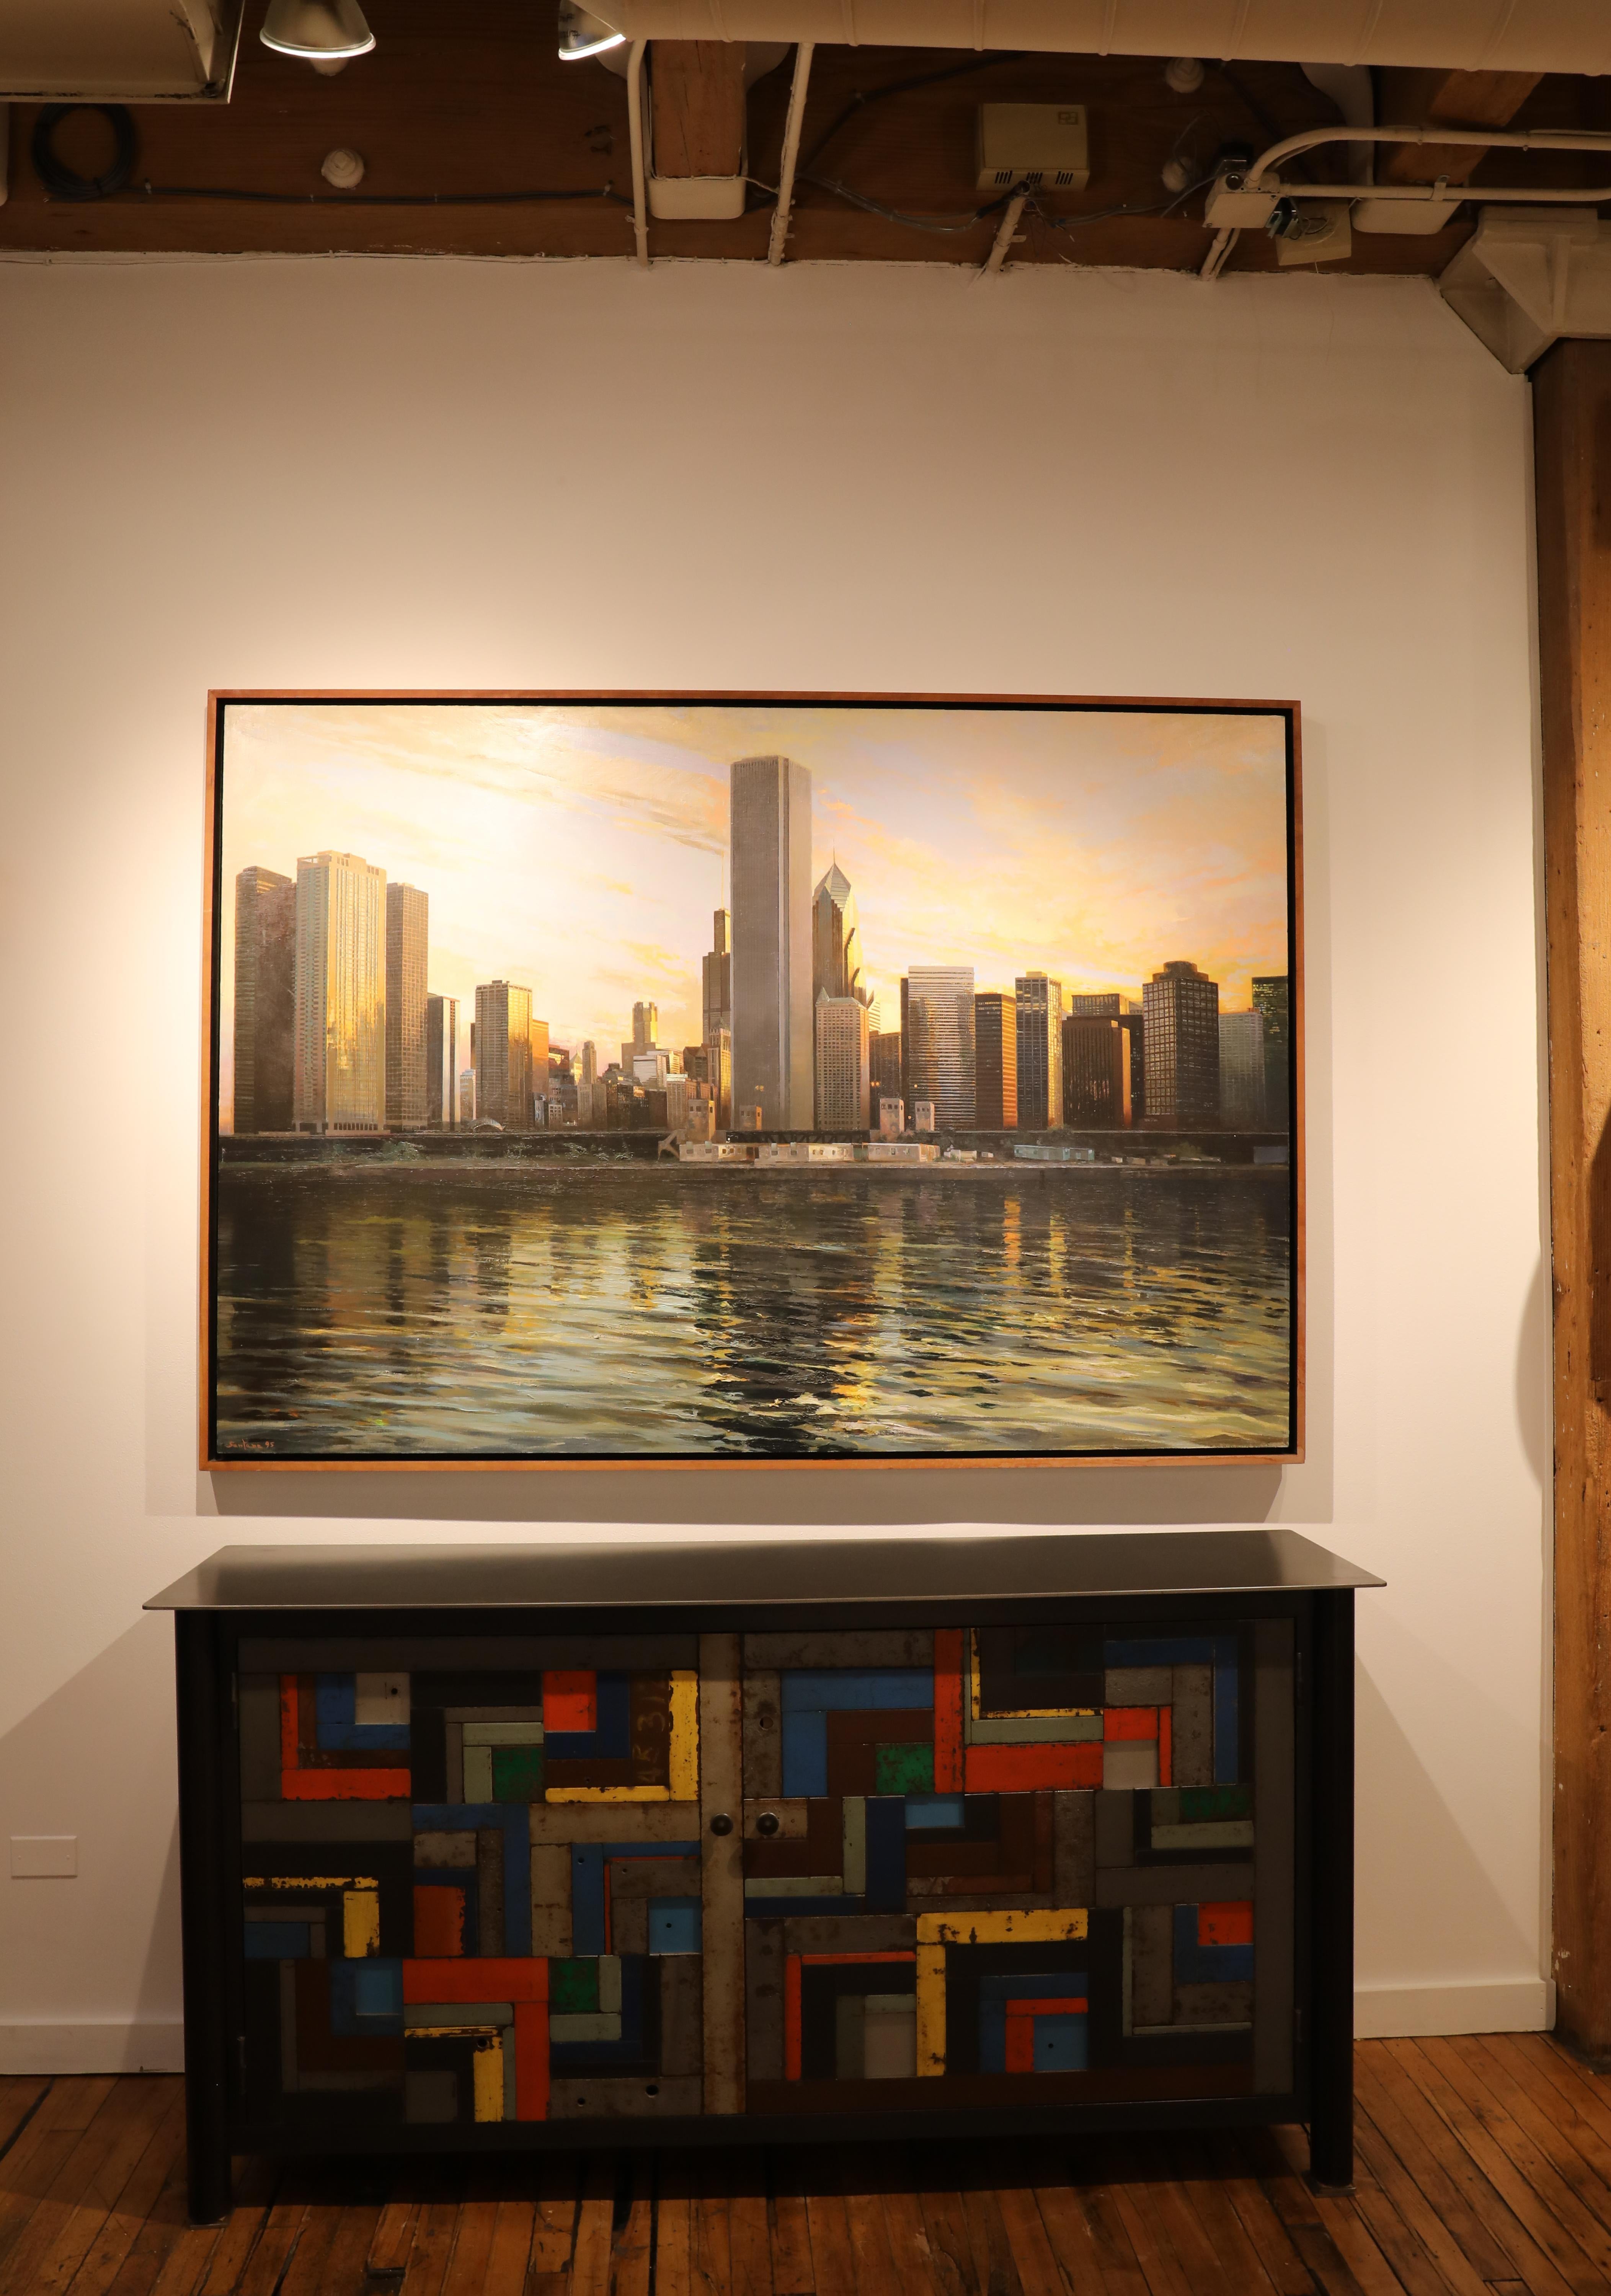 Chicago, City View from Lake Michigan Looking North West, Oil on Canvas - Contemporary Painting by Enrique Santana